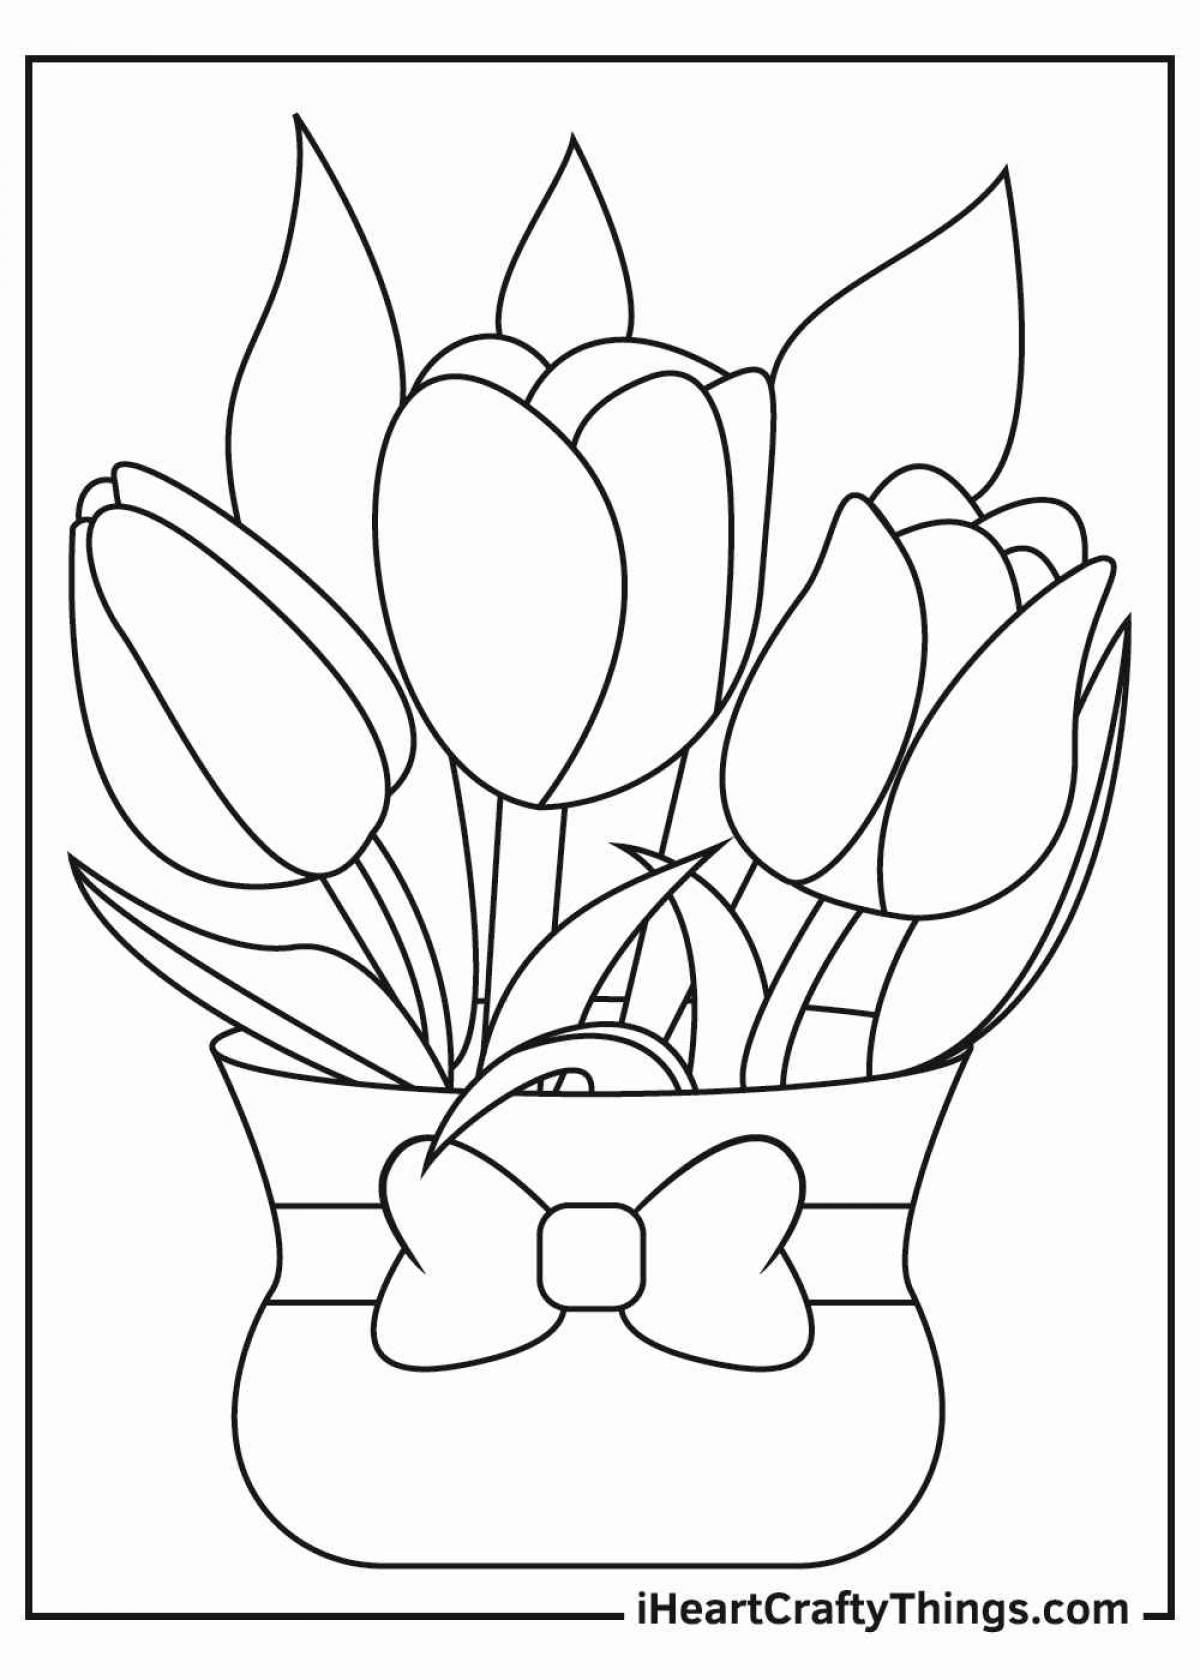 Fine tulips coloring for children 5-6 years old